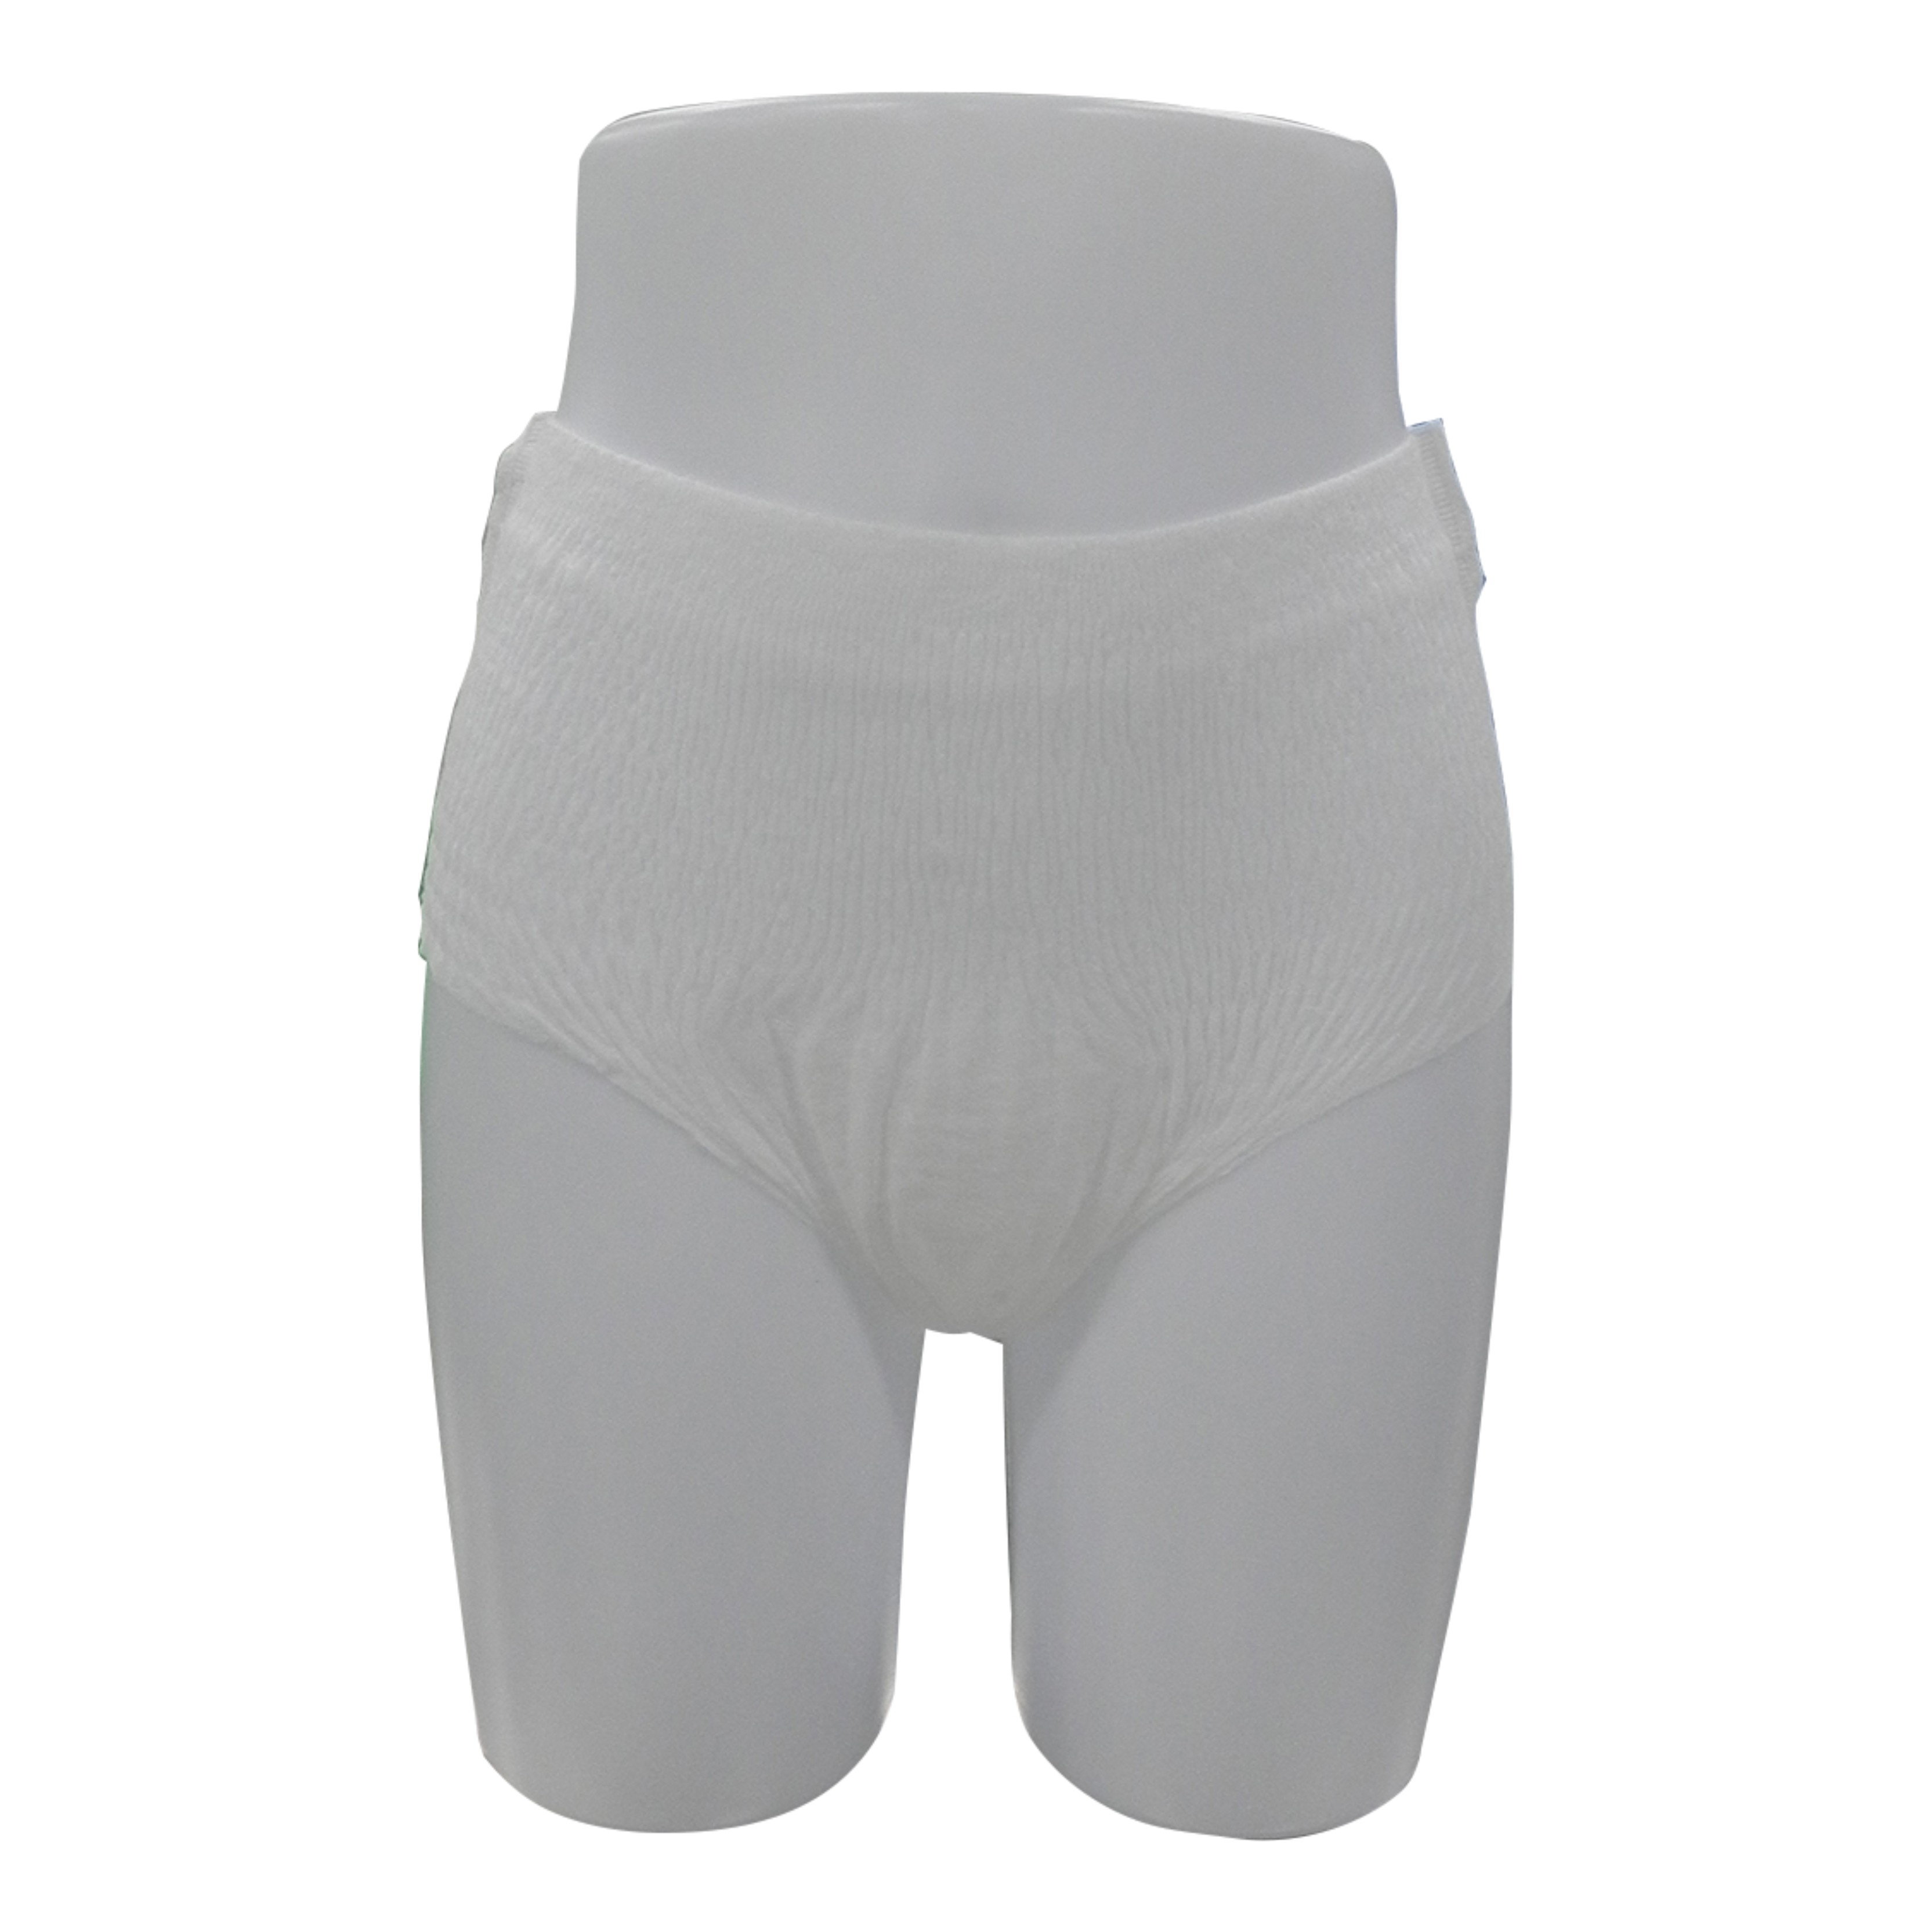 High Quality for Sanitary Pads Online - super sleepy lady women sanitary napkins female period pants in pull up style – Yoho